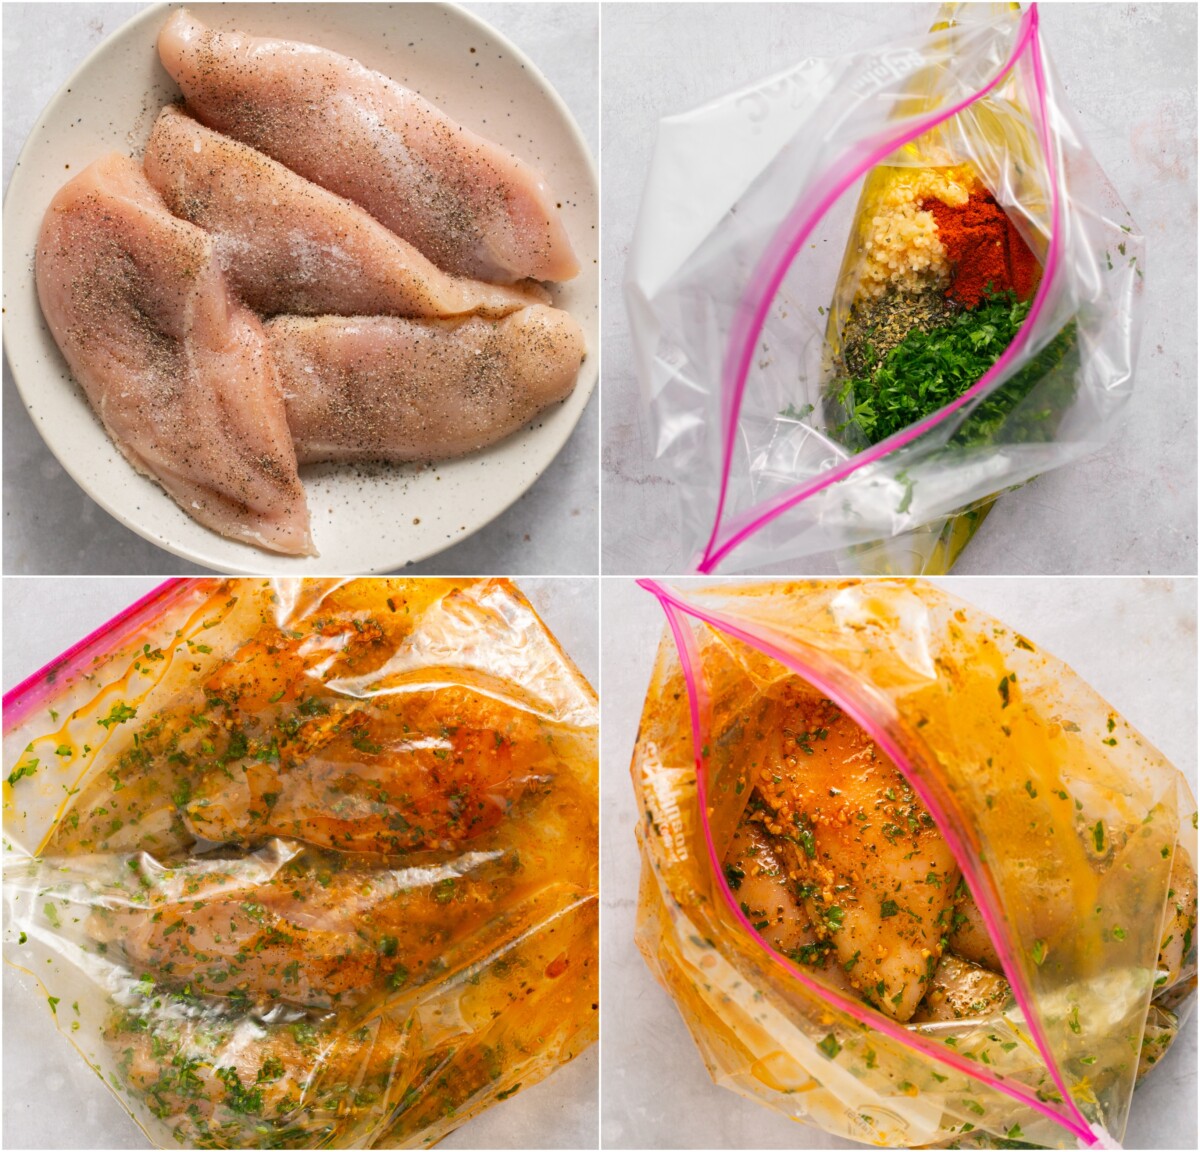 4 photo collage with seasoned chicken breasts, a bag of marinade ingredients, a sealed bag with chicken and marinade inside, and a bag opened to reveal the marinated chicken. 